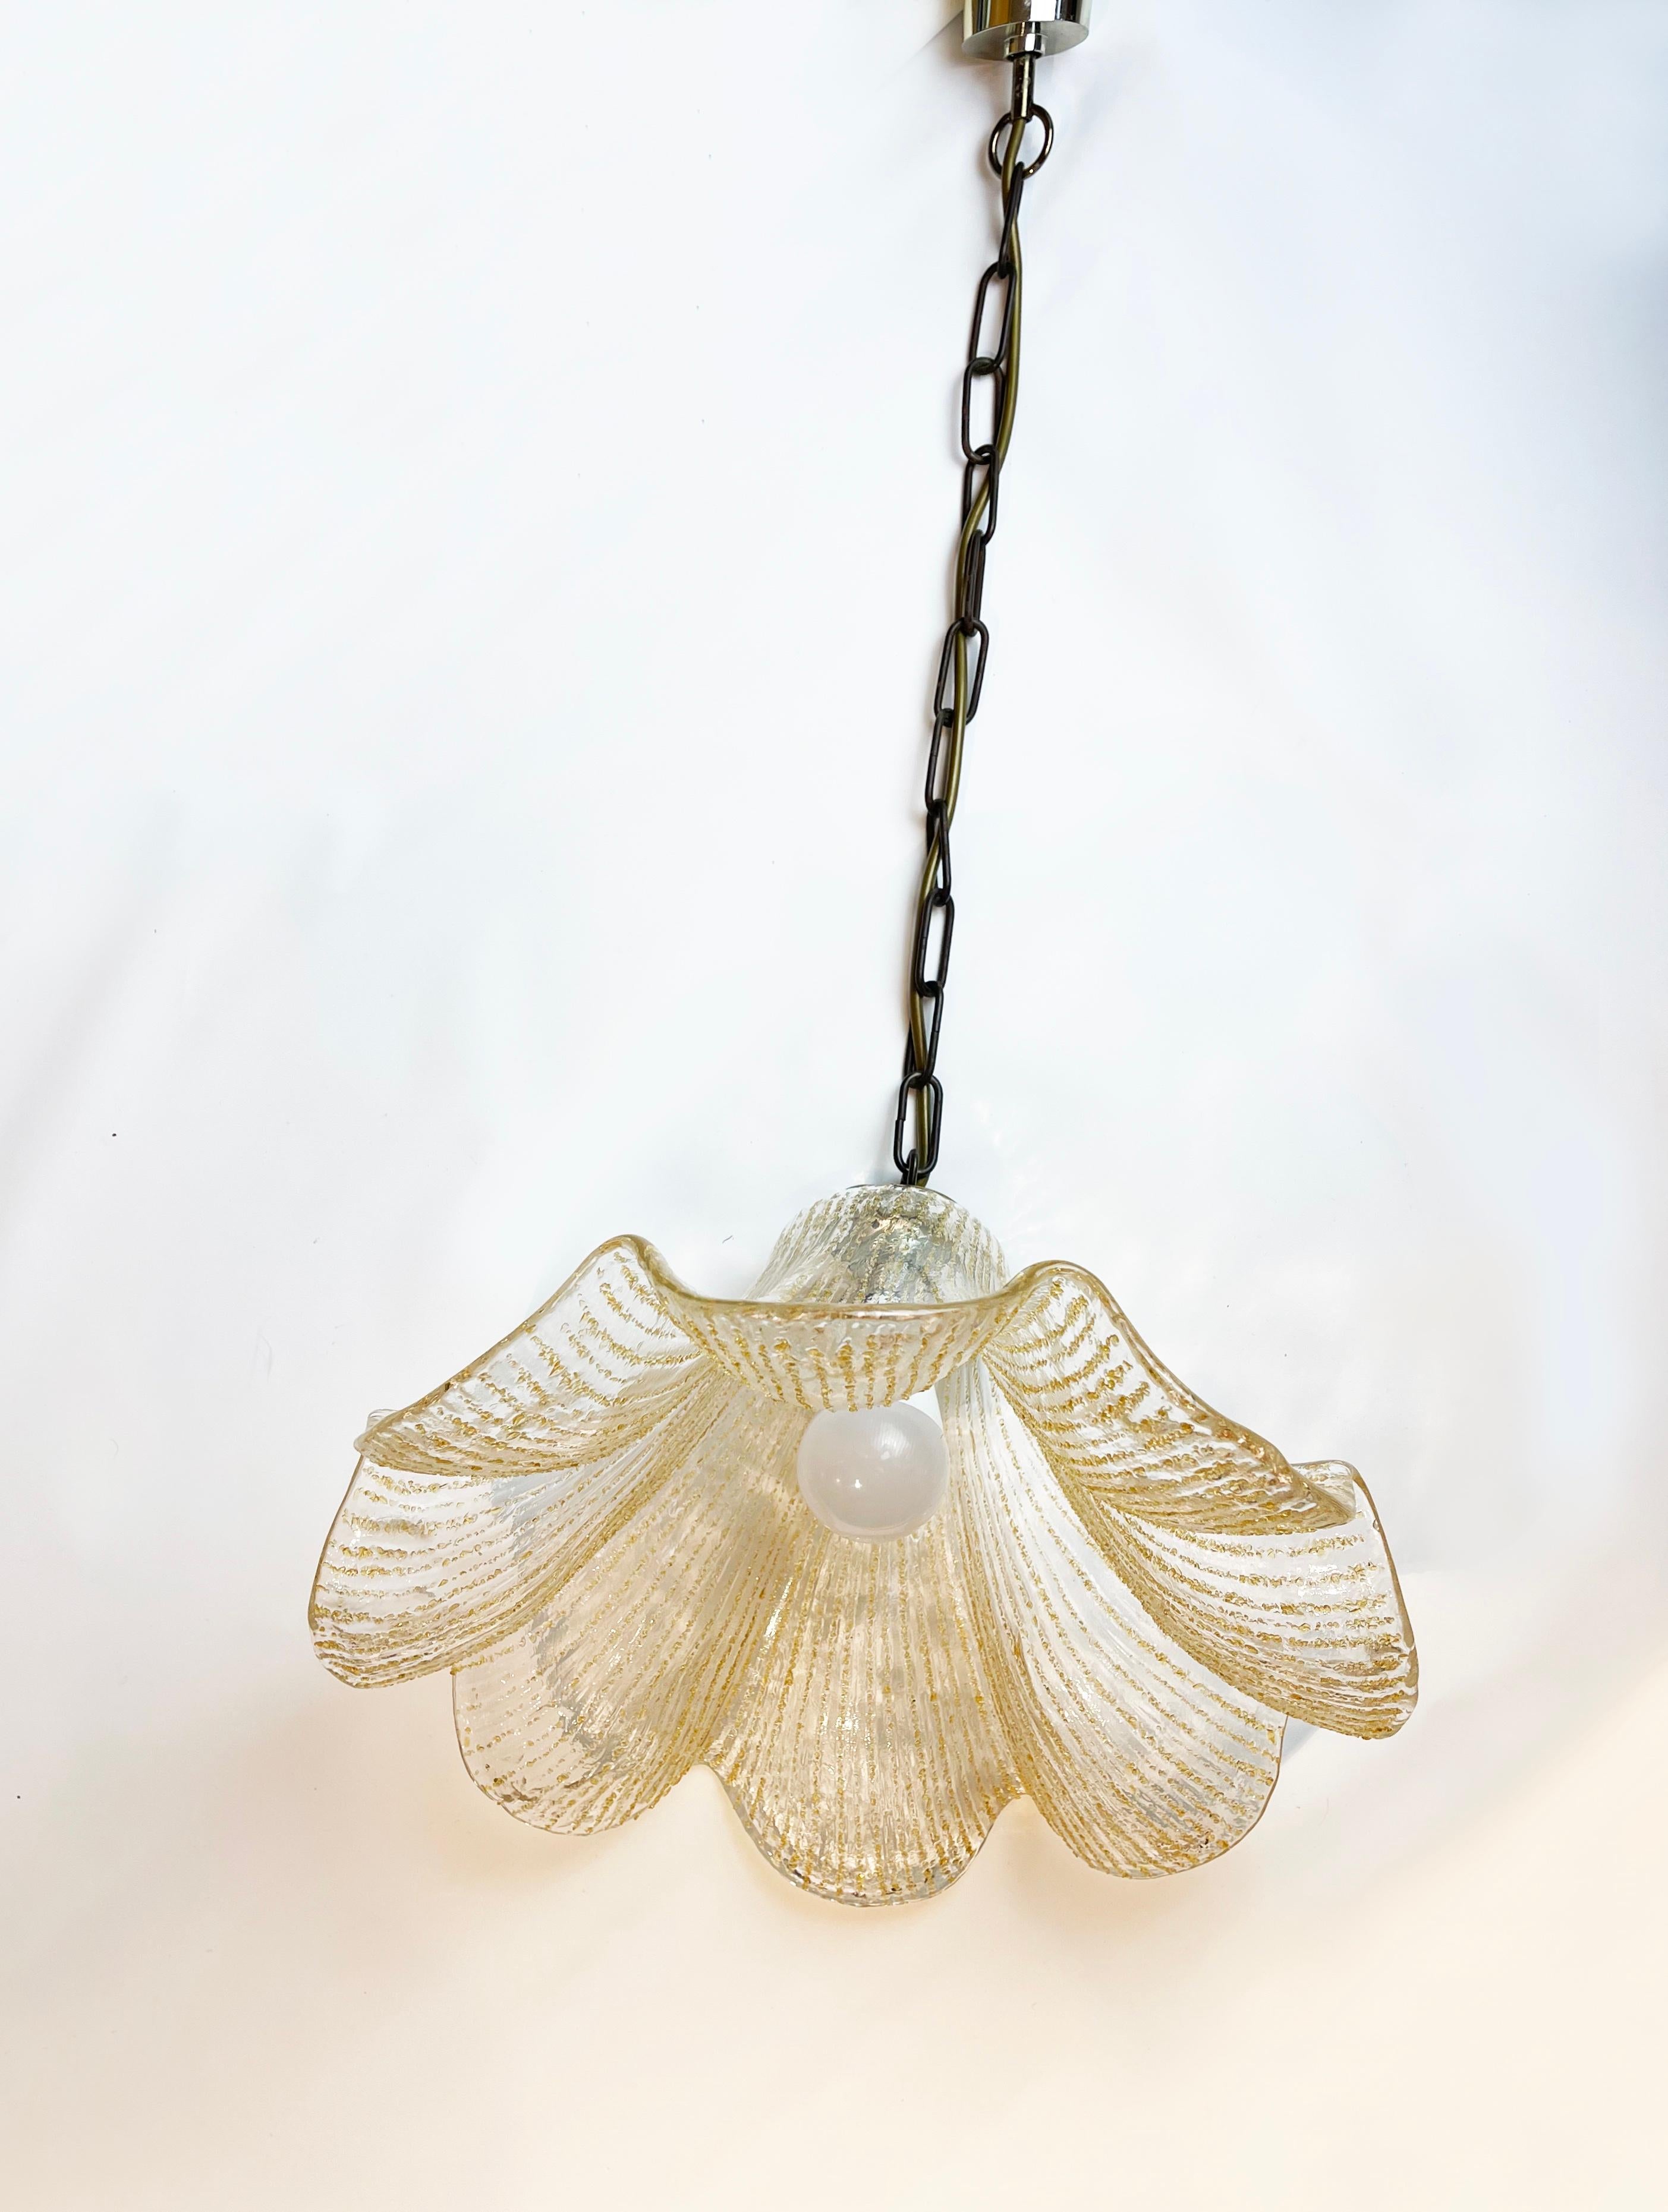 Hand crafted, chunky Murano glass pendant by German mid-century lighting maker Kabo.
A modern German design classic from the late 70s to early 80s in the shape of a gingko-style calyx, in clear glass with golden translucent particles forming stripes